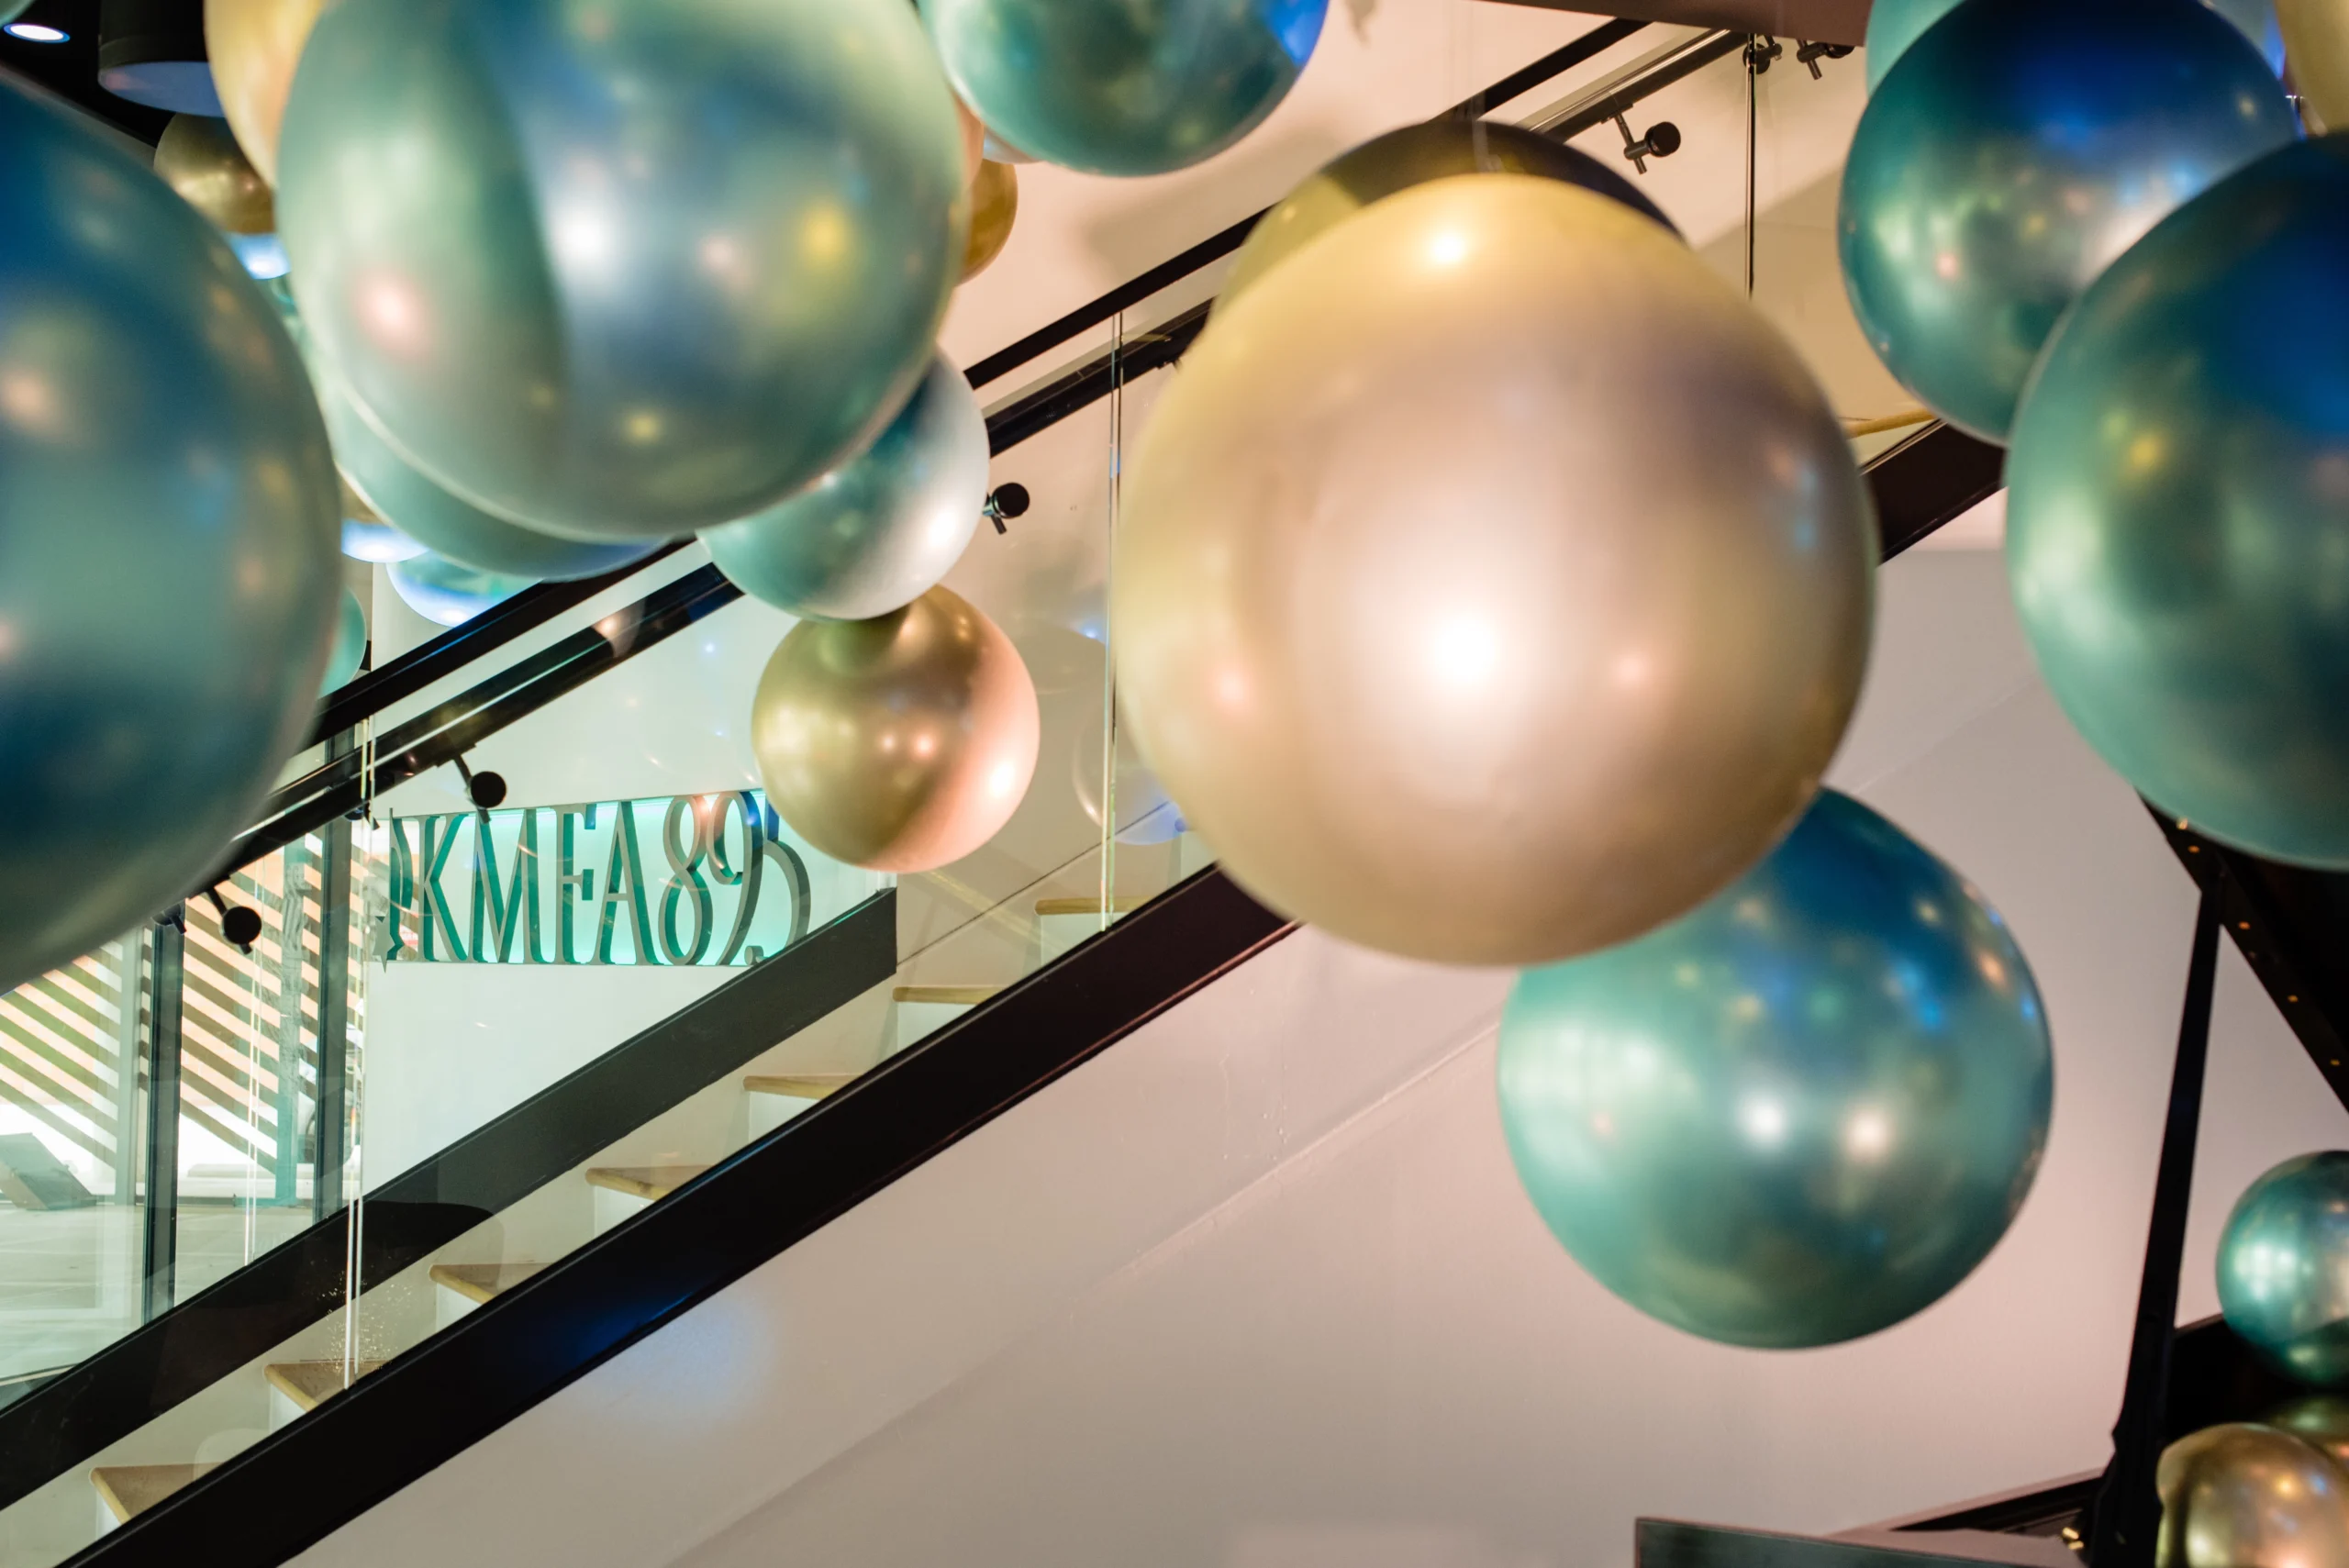 The KMFA event space lobby with metallic balloons